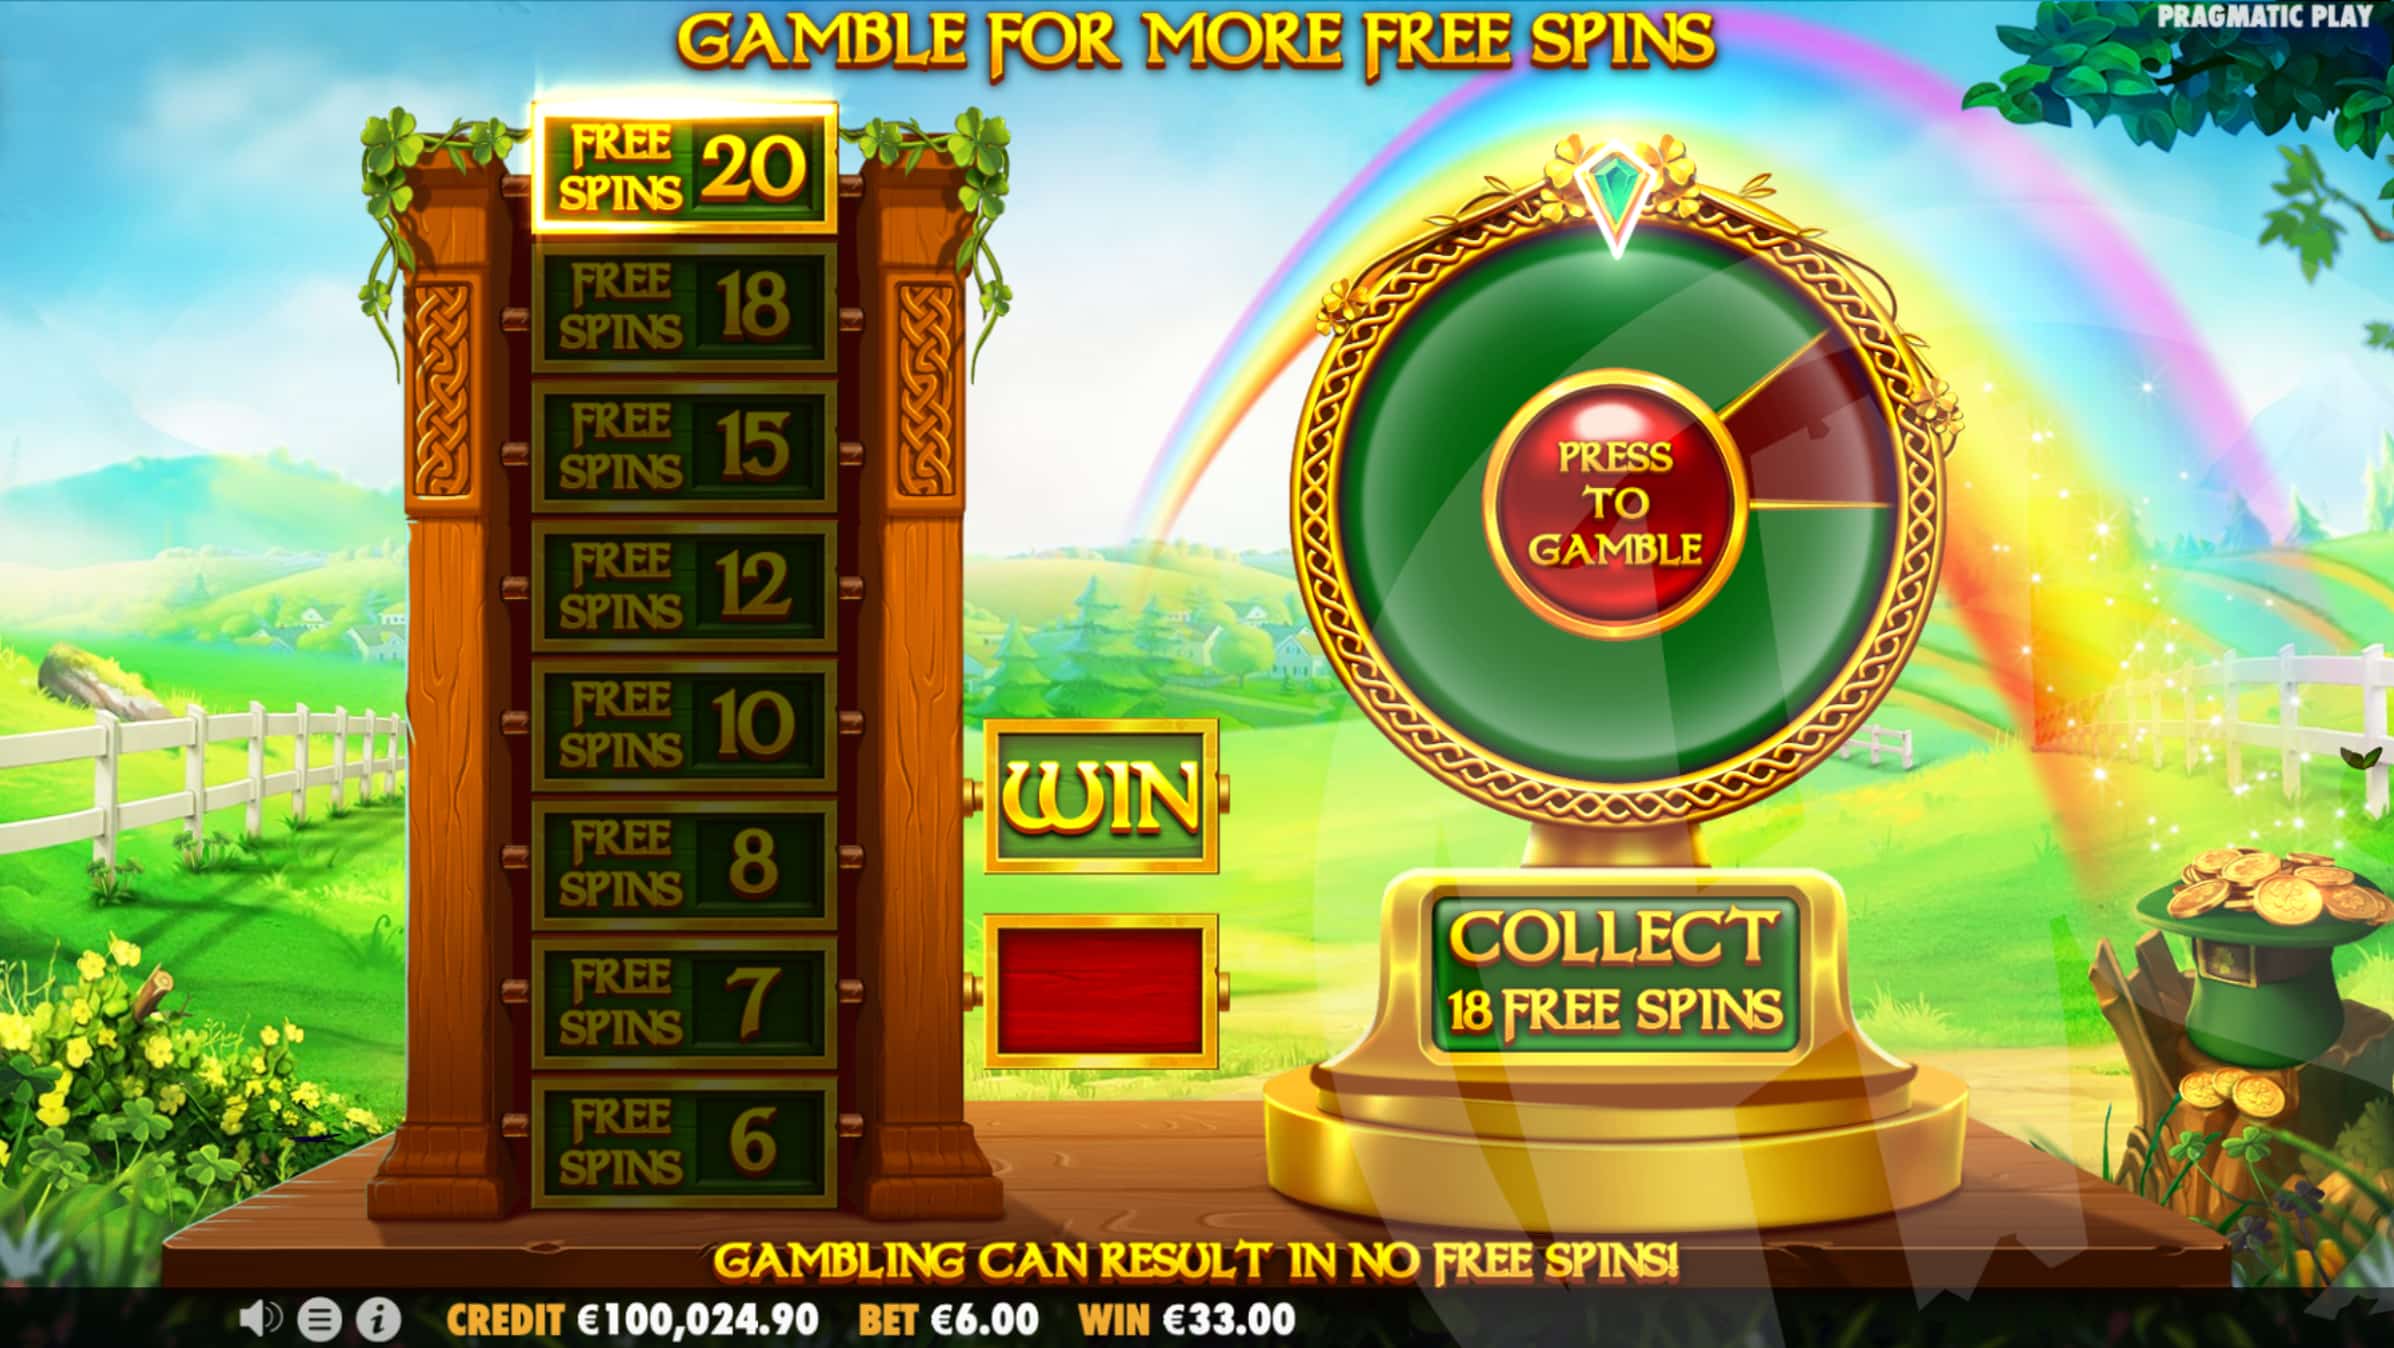 Gamble Free Spins Up To 20 Free Spins